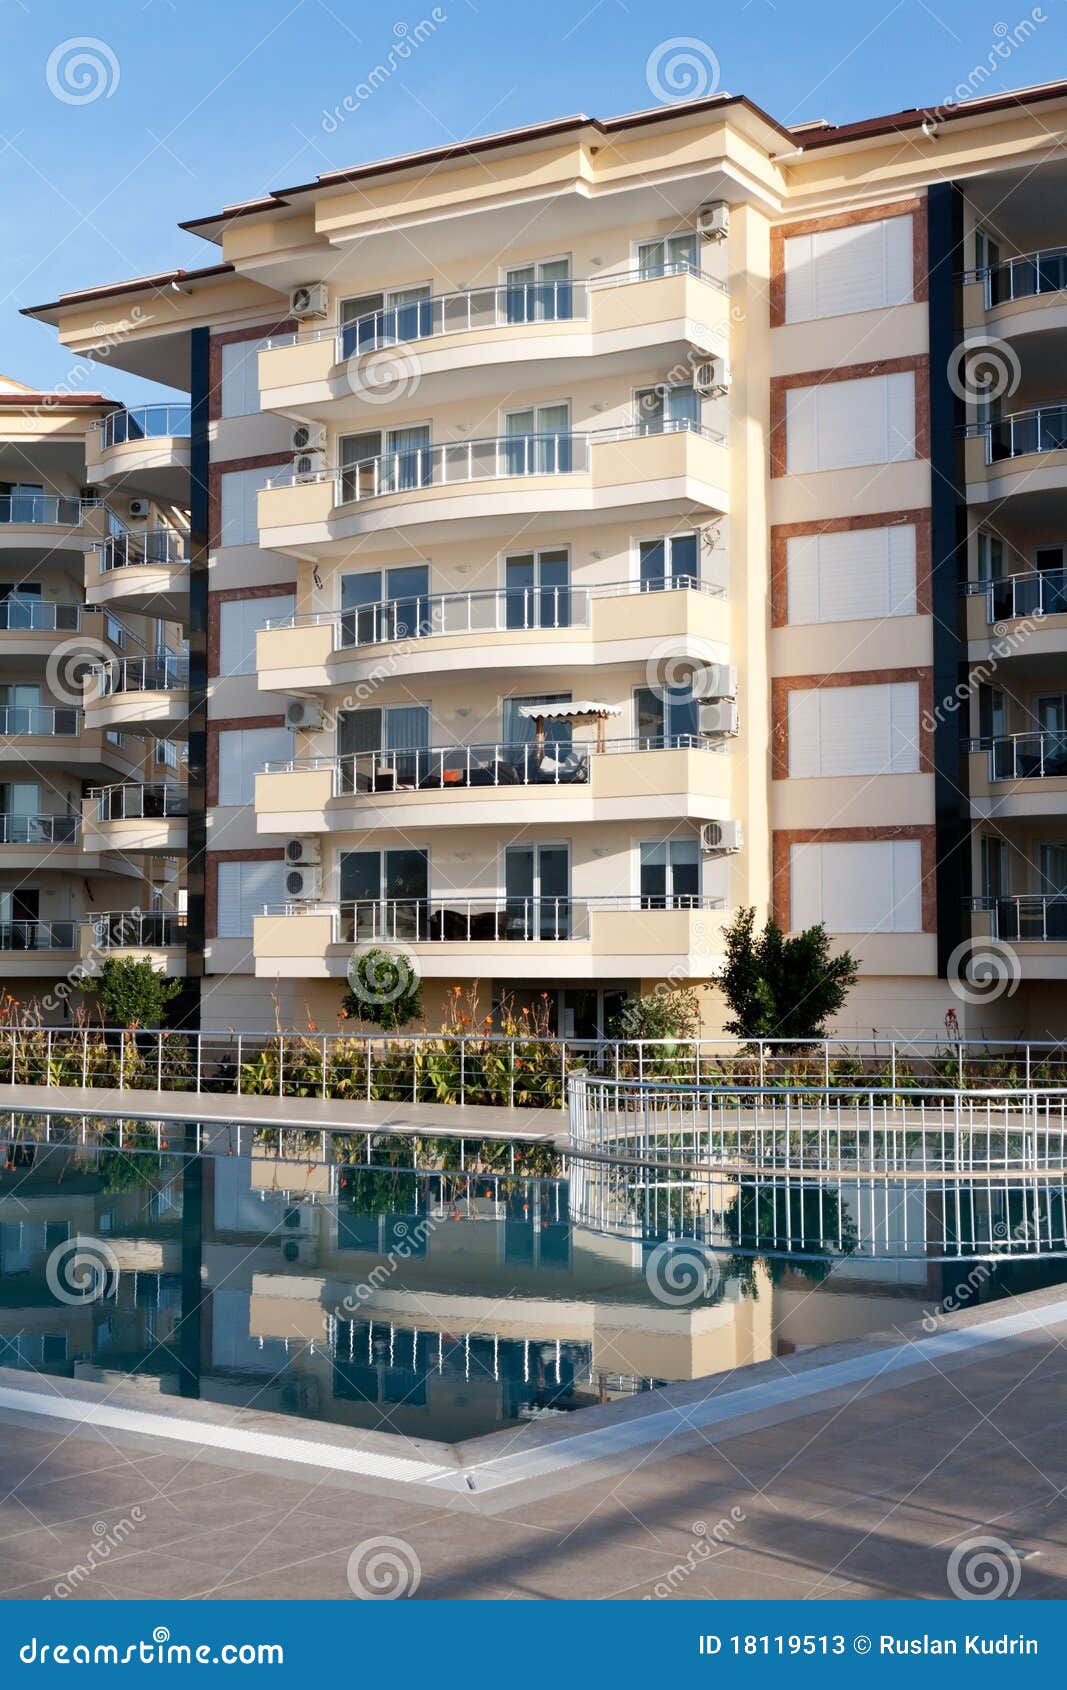 House with balconies stock image. Image of buildings - 18119513